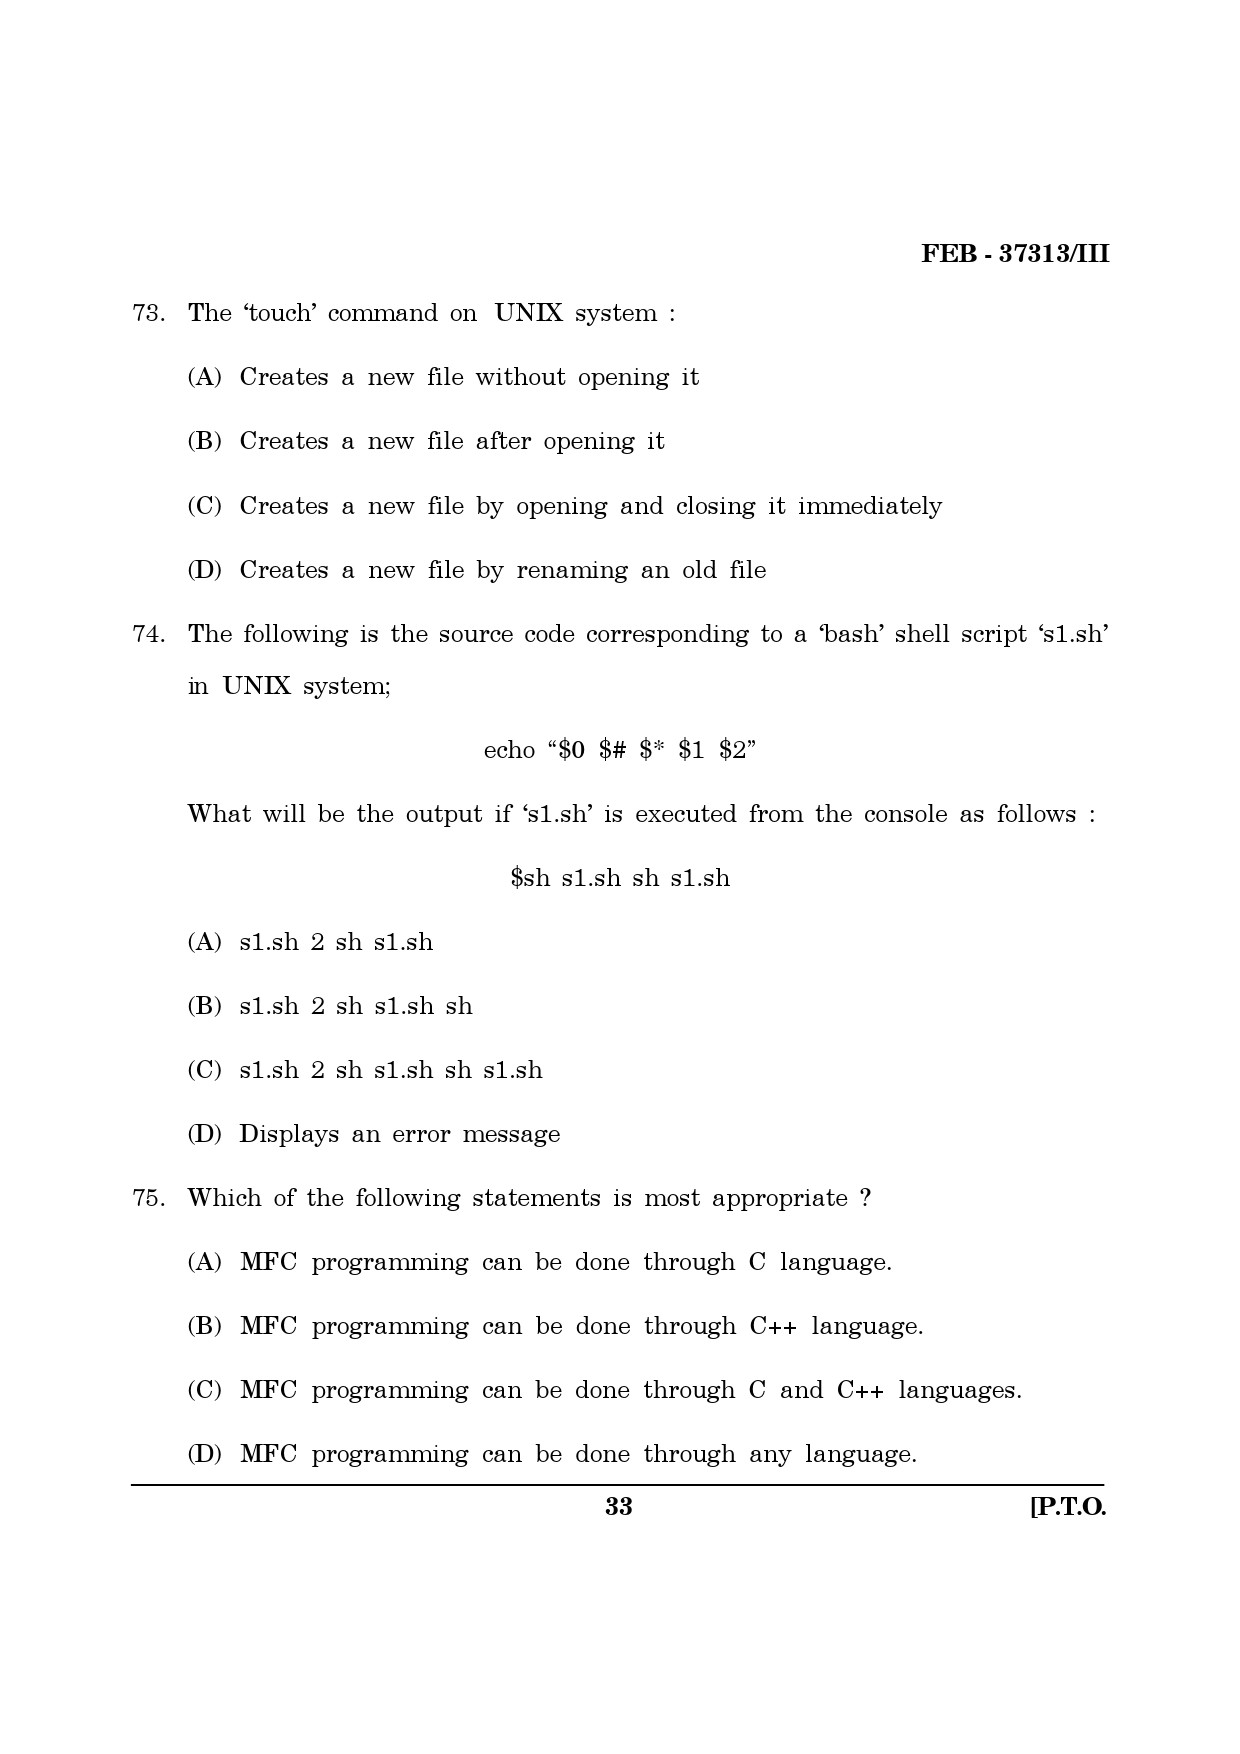 Maharashtra SET Computer Science and Application Question Paper III February 2013 33